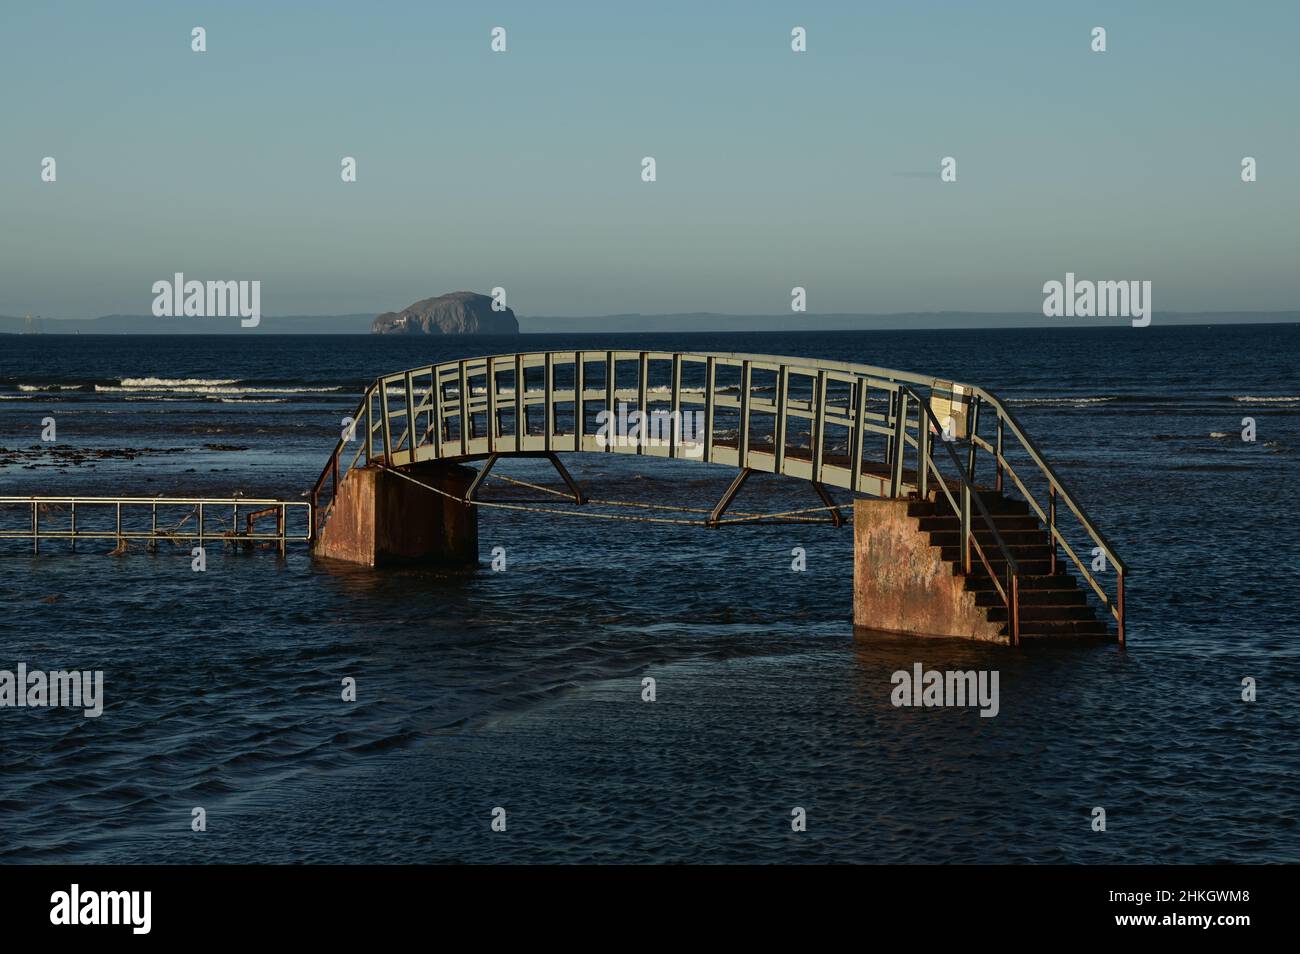 A view of the “bridge to nowhere” in Belhaven bay near Dunbar in East Lothian, Scotland. Stock Photo